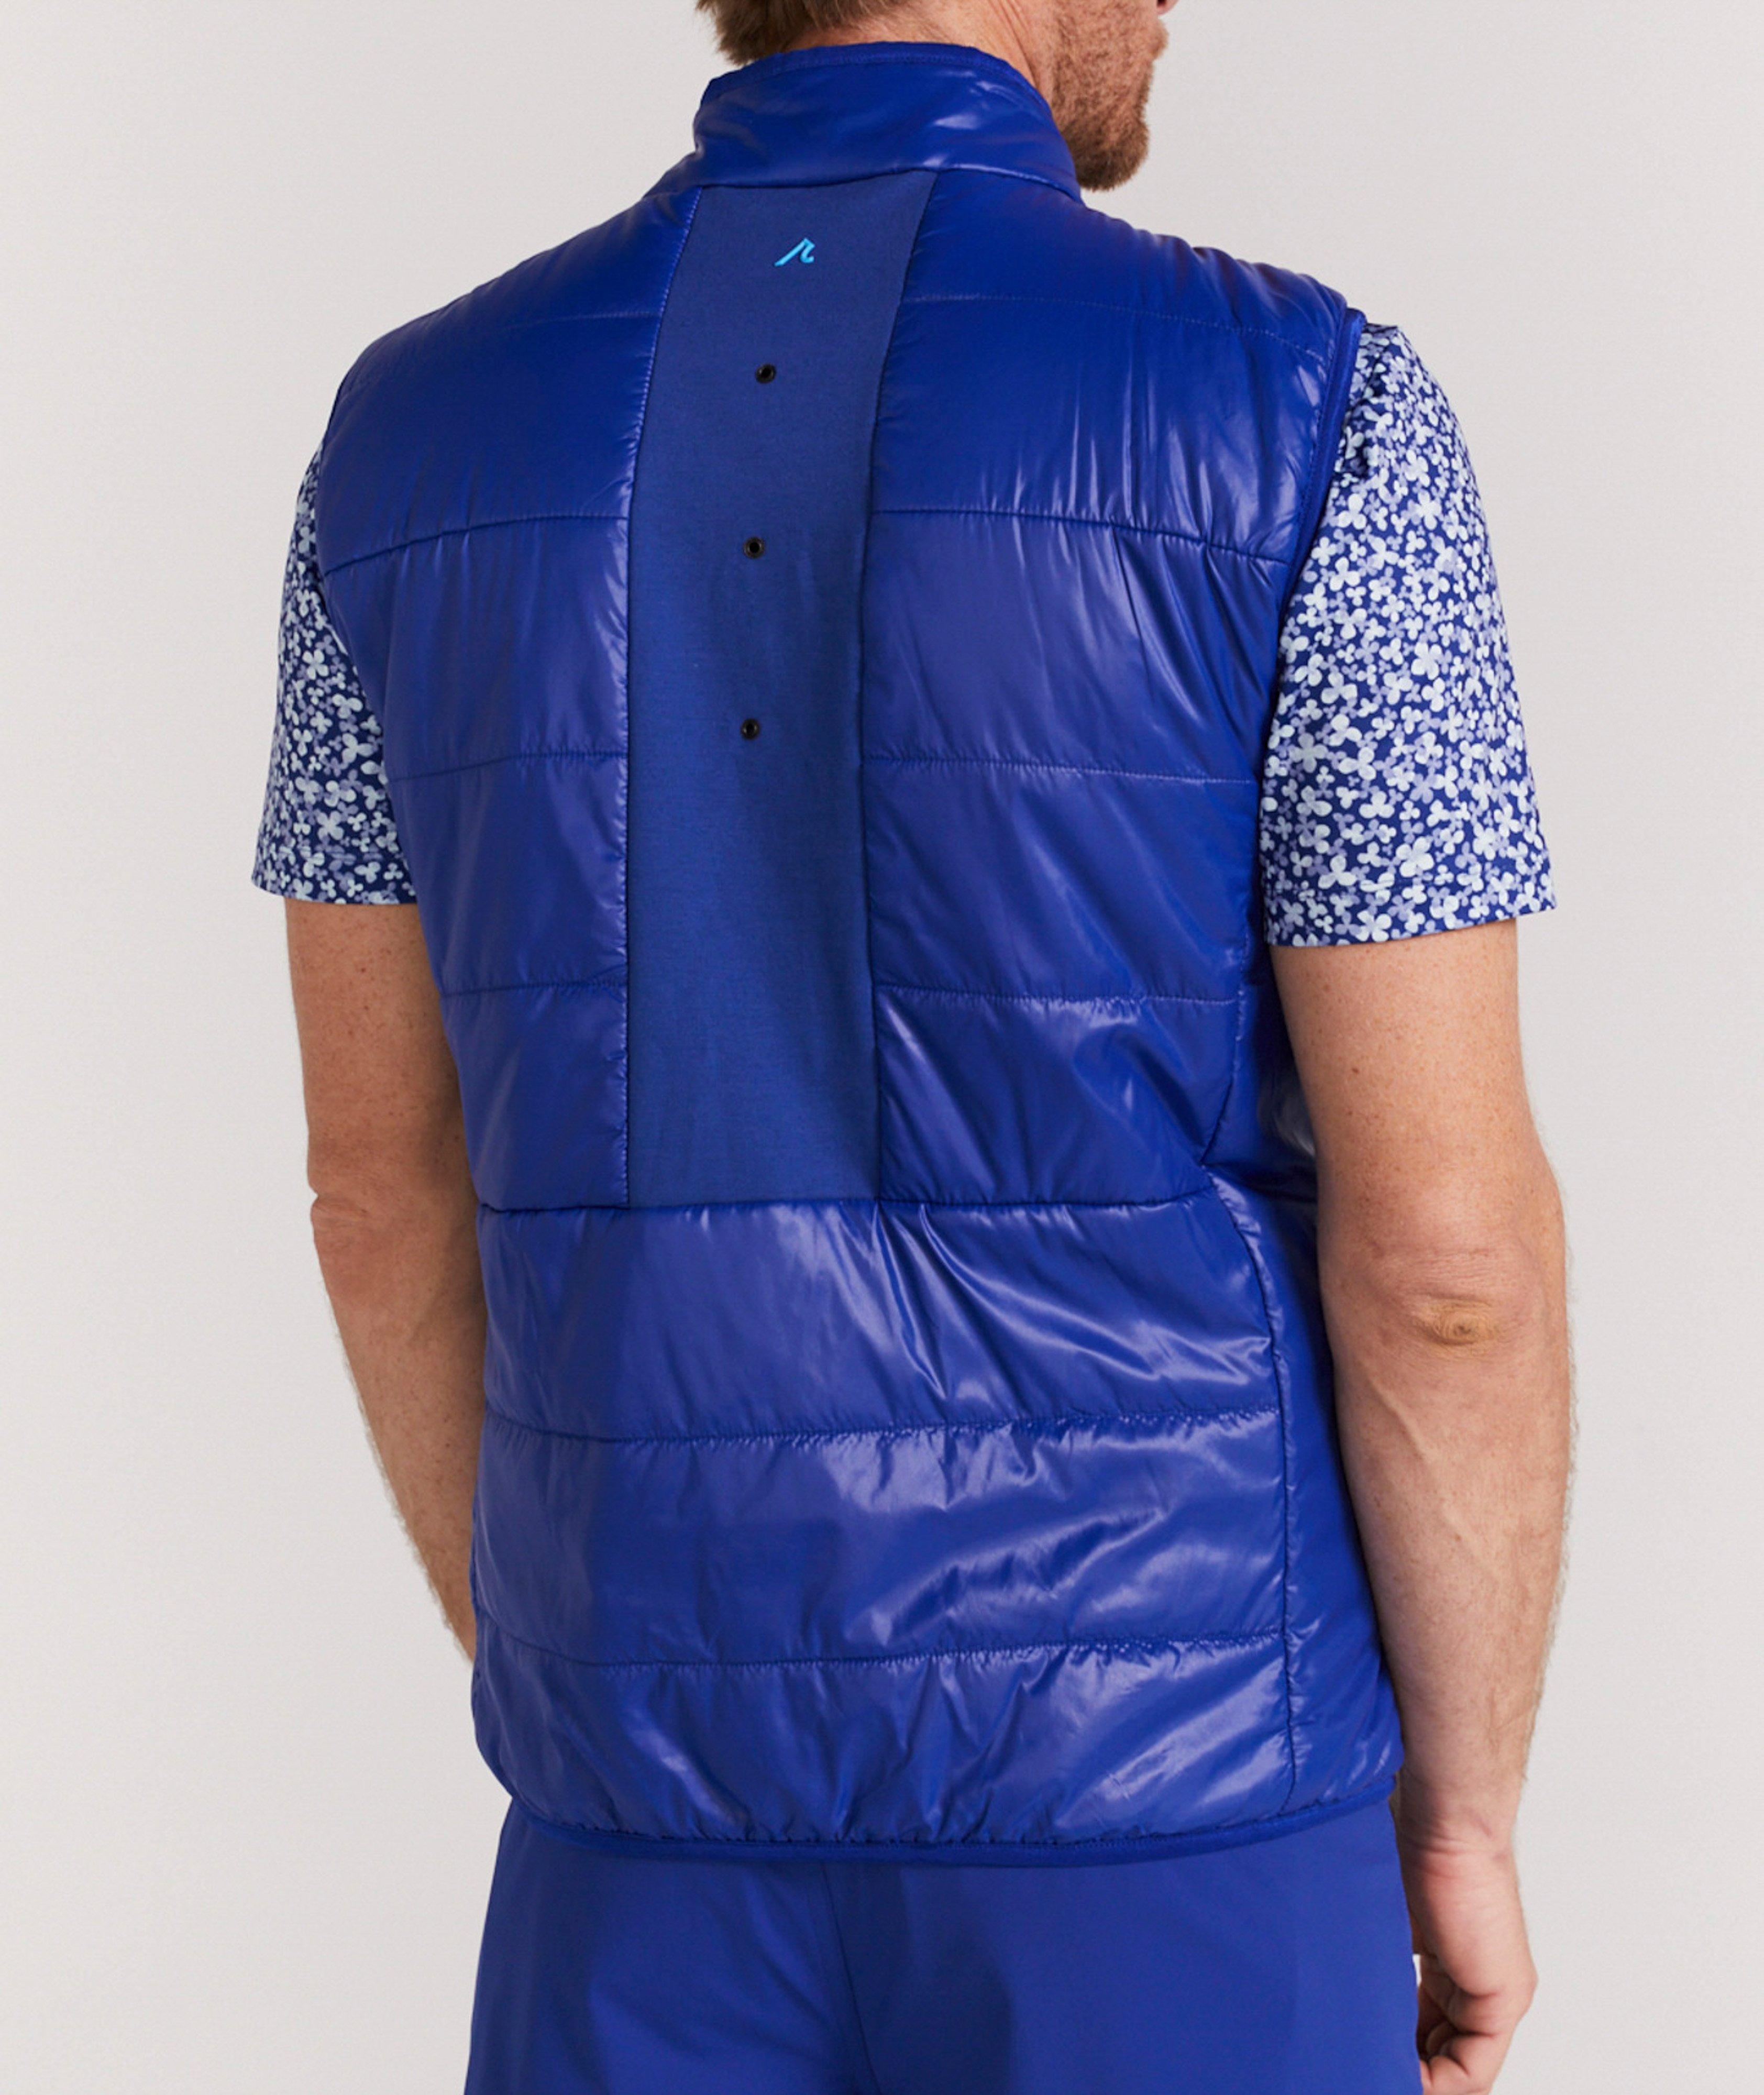 Bolton Quilted Technical Fabric Vest image 3